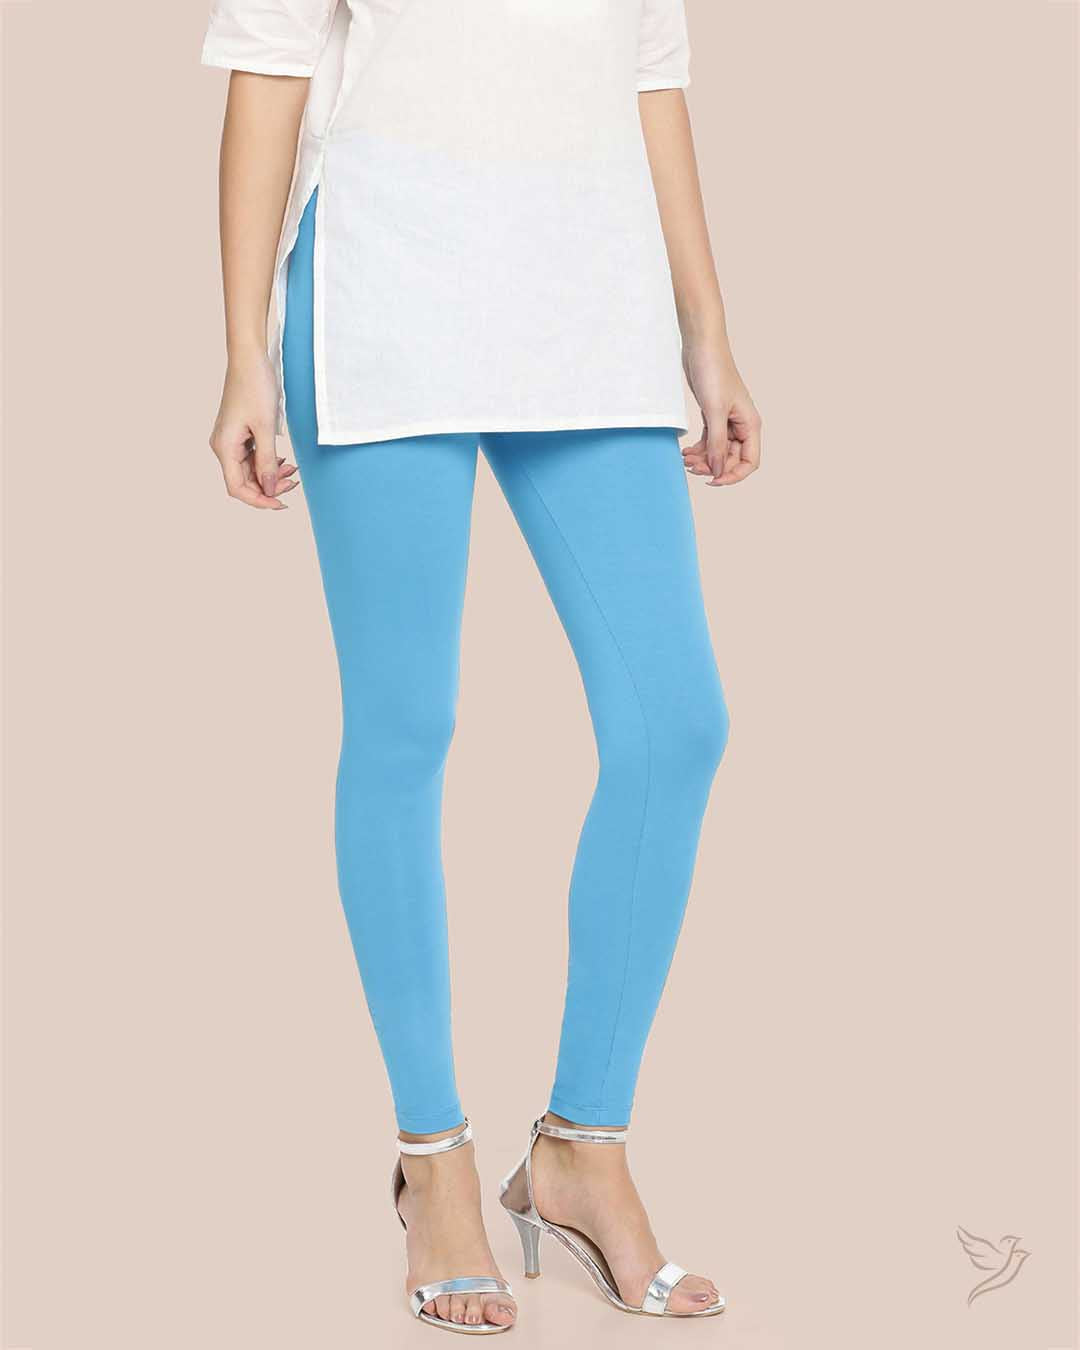 Grand Turquoise Cotton Ankle Legging for Women